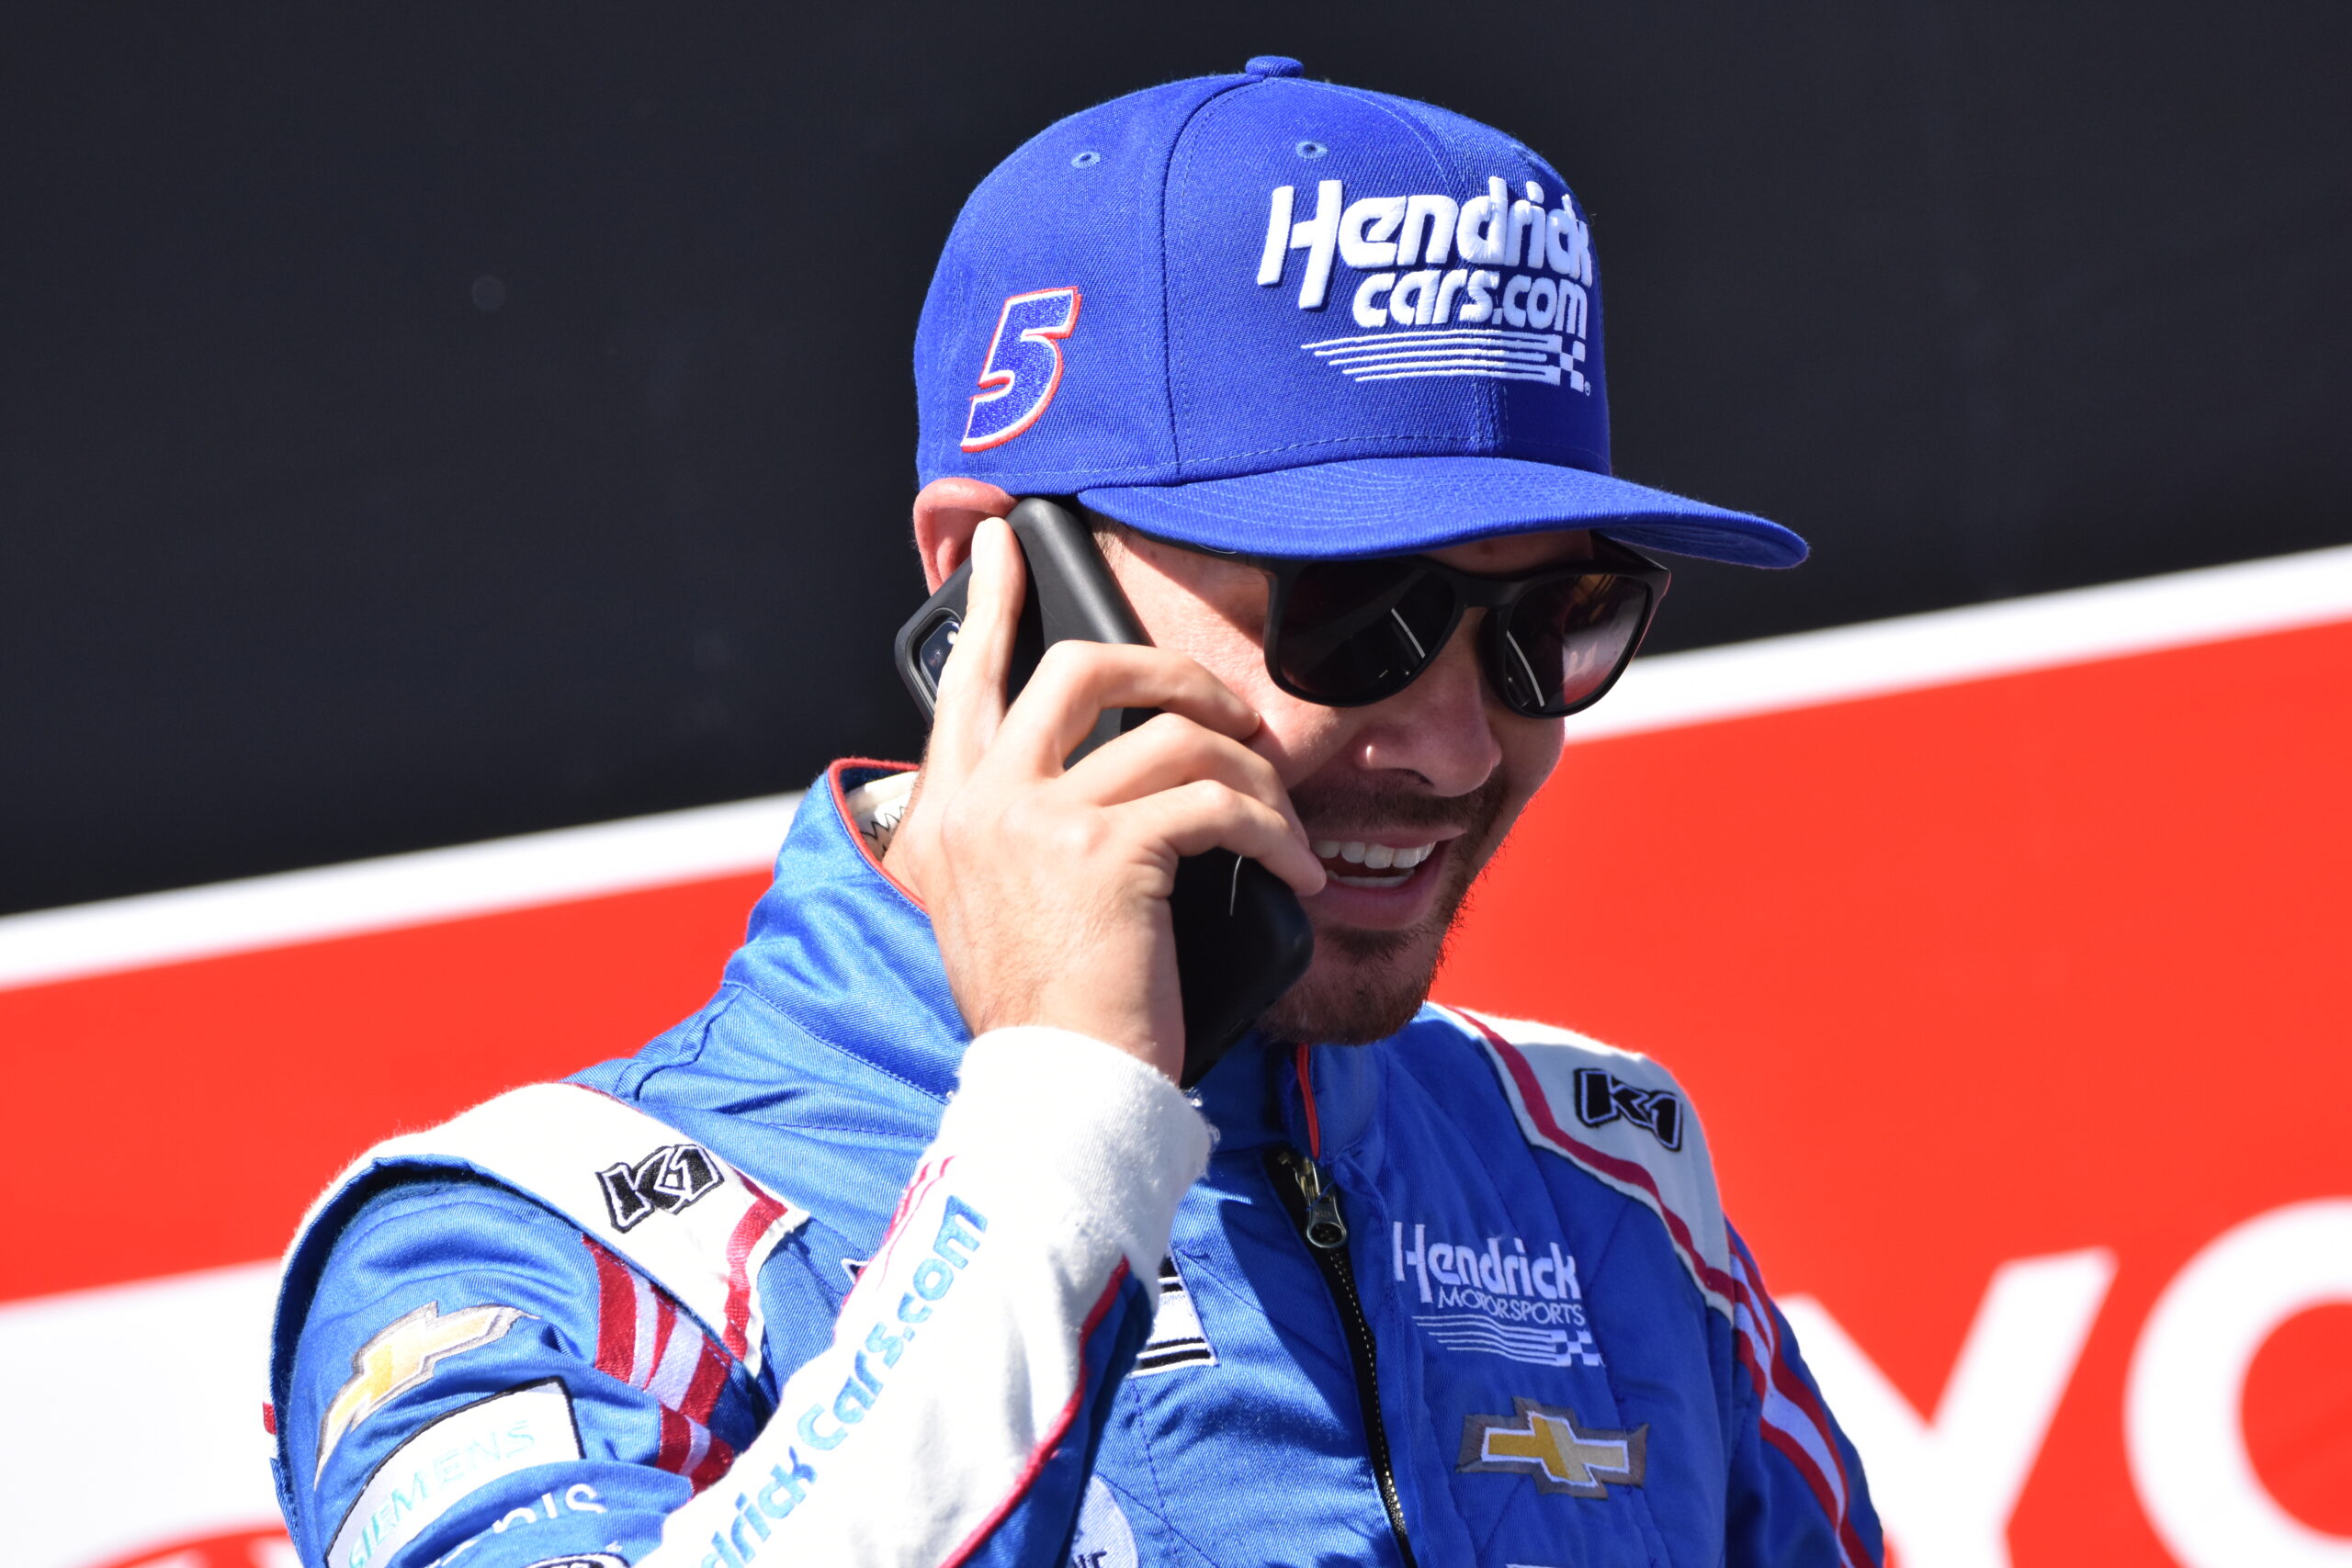 "Hello? Is it me you're looking for?" (Photo: Luis Torres/The Podium Finish)